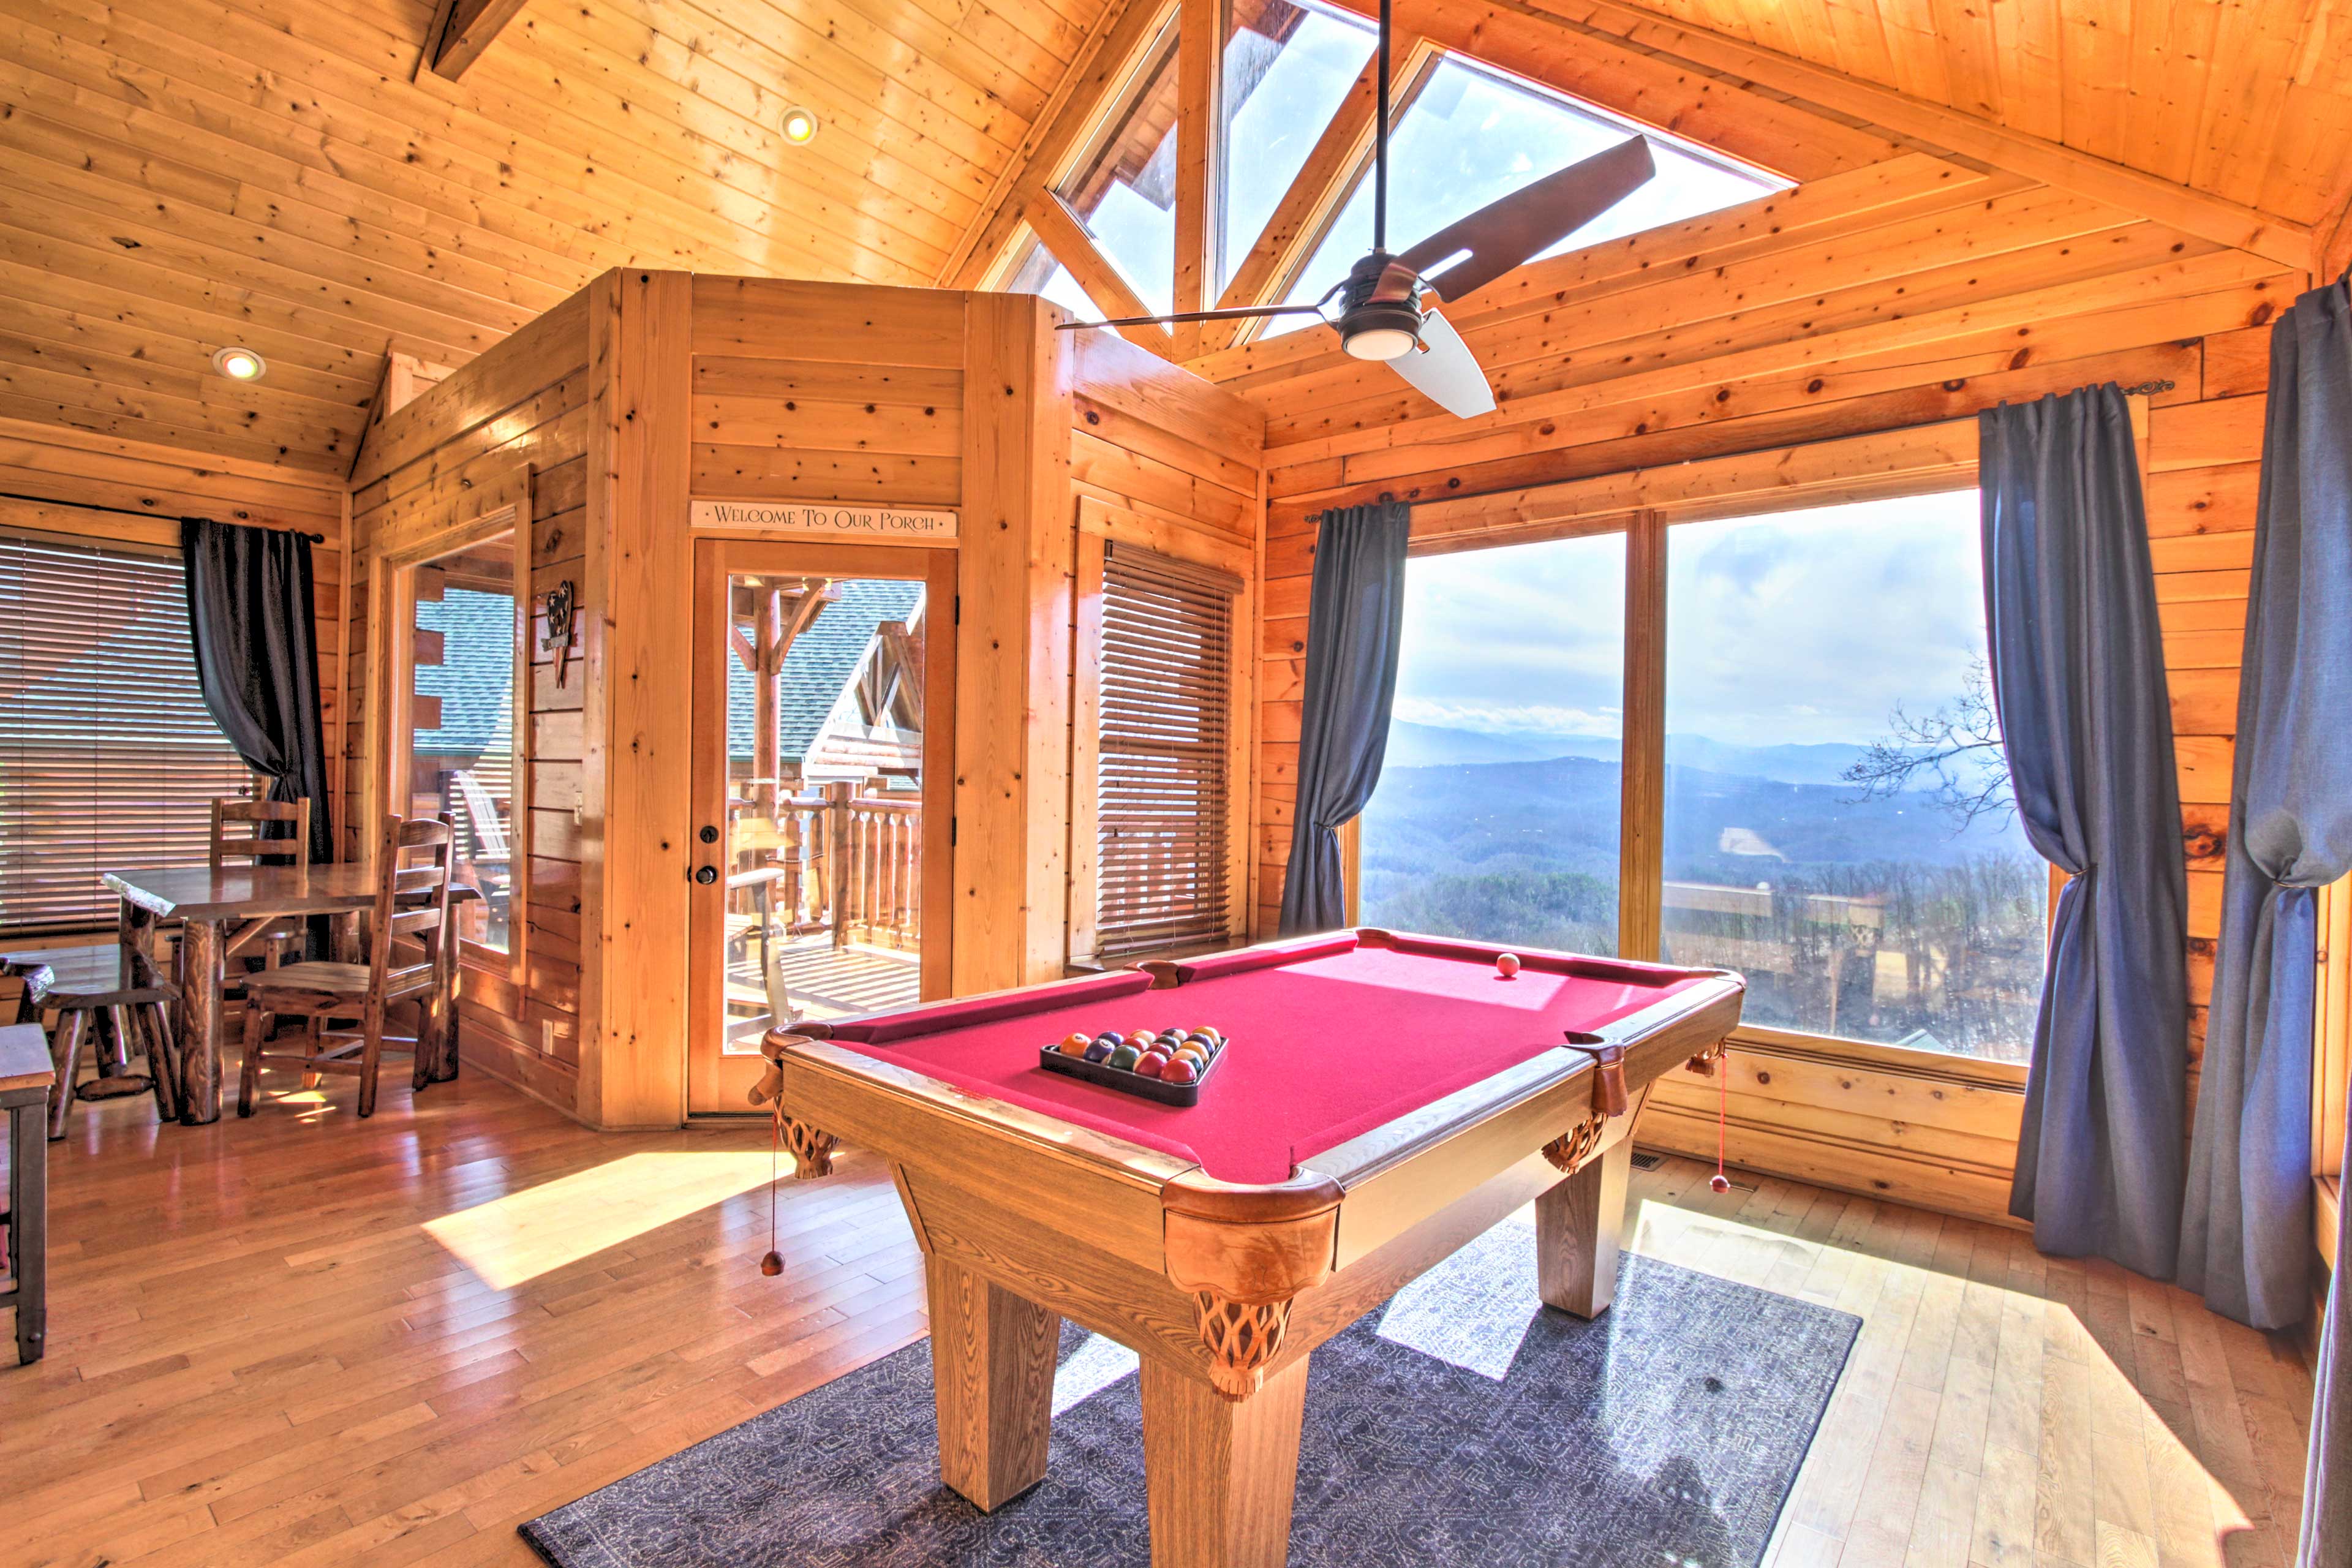 Property Image 2 - Pigeon Forge Mountain Cabin: Hot Tub & Resort Pool